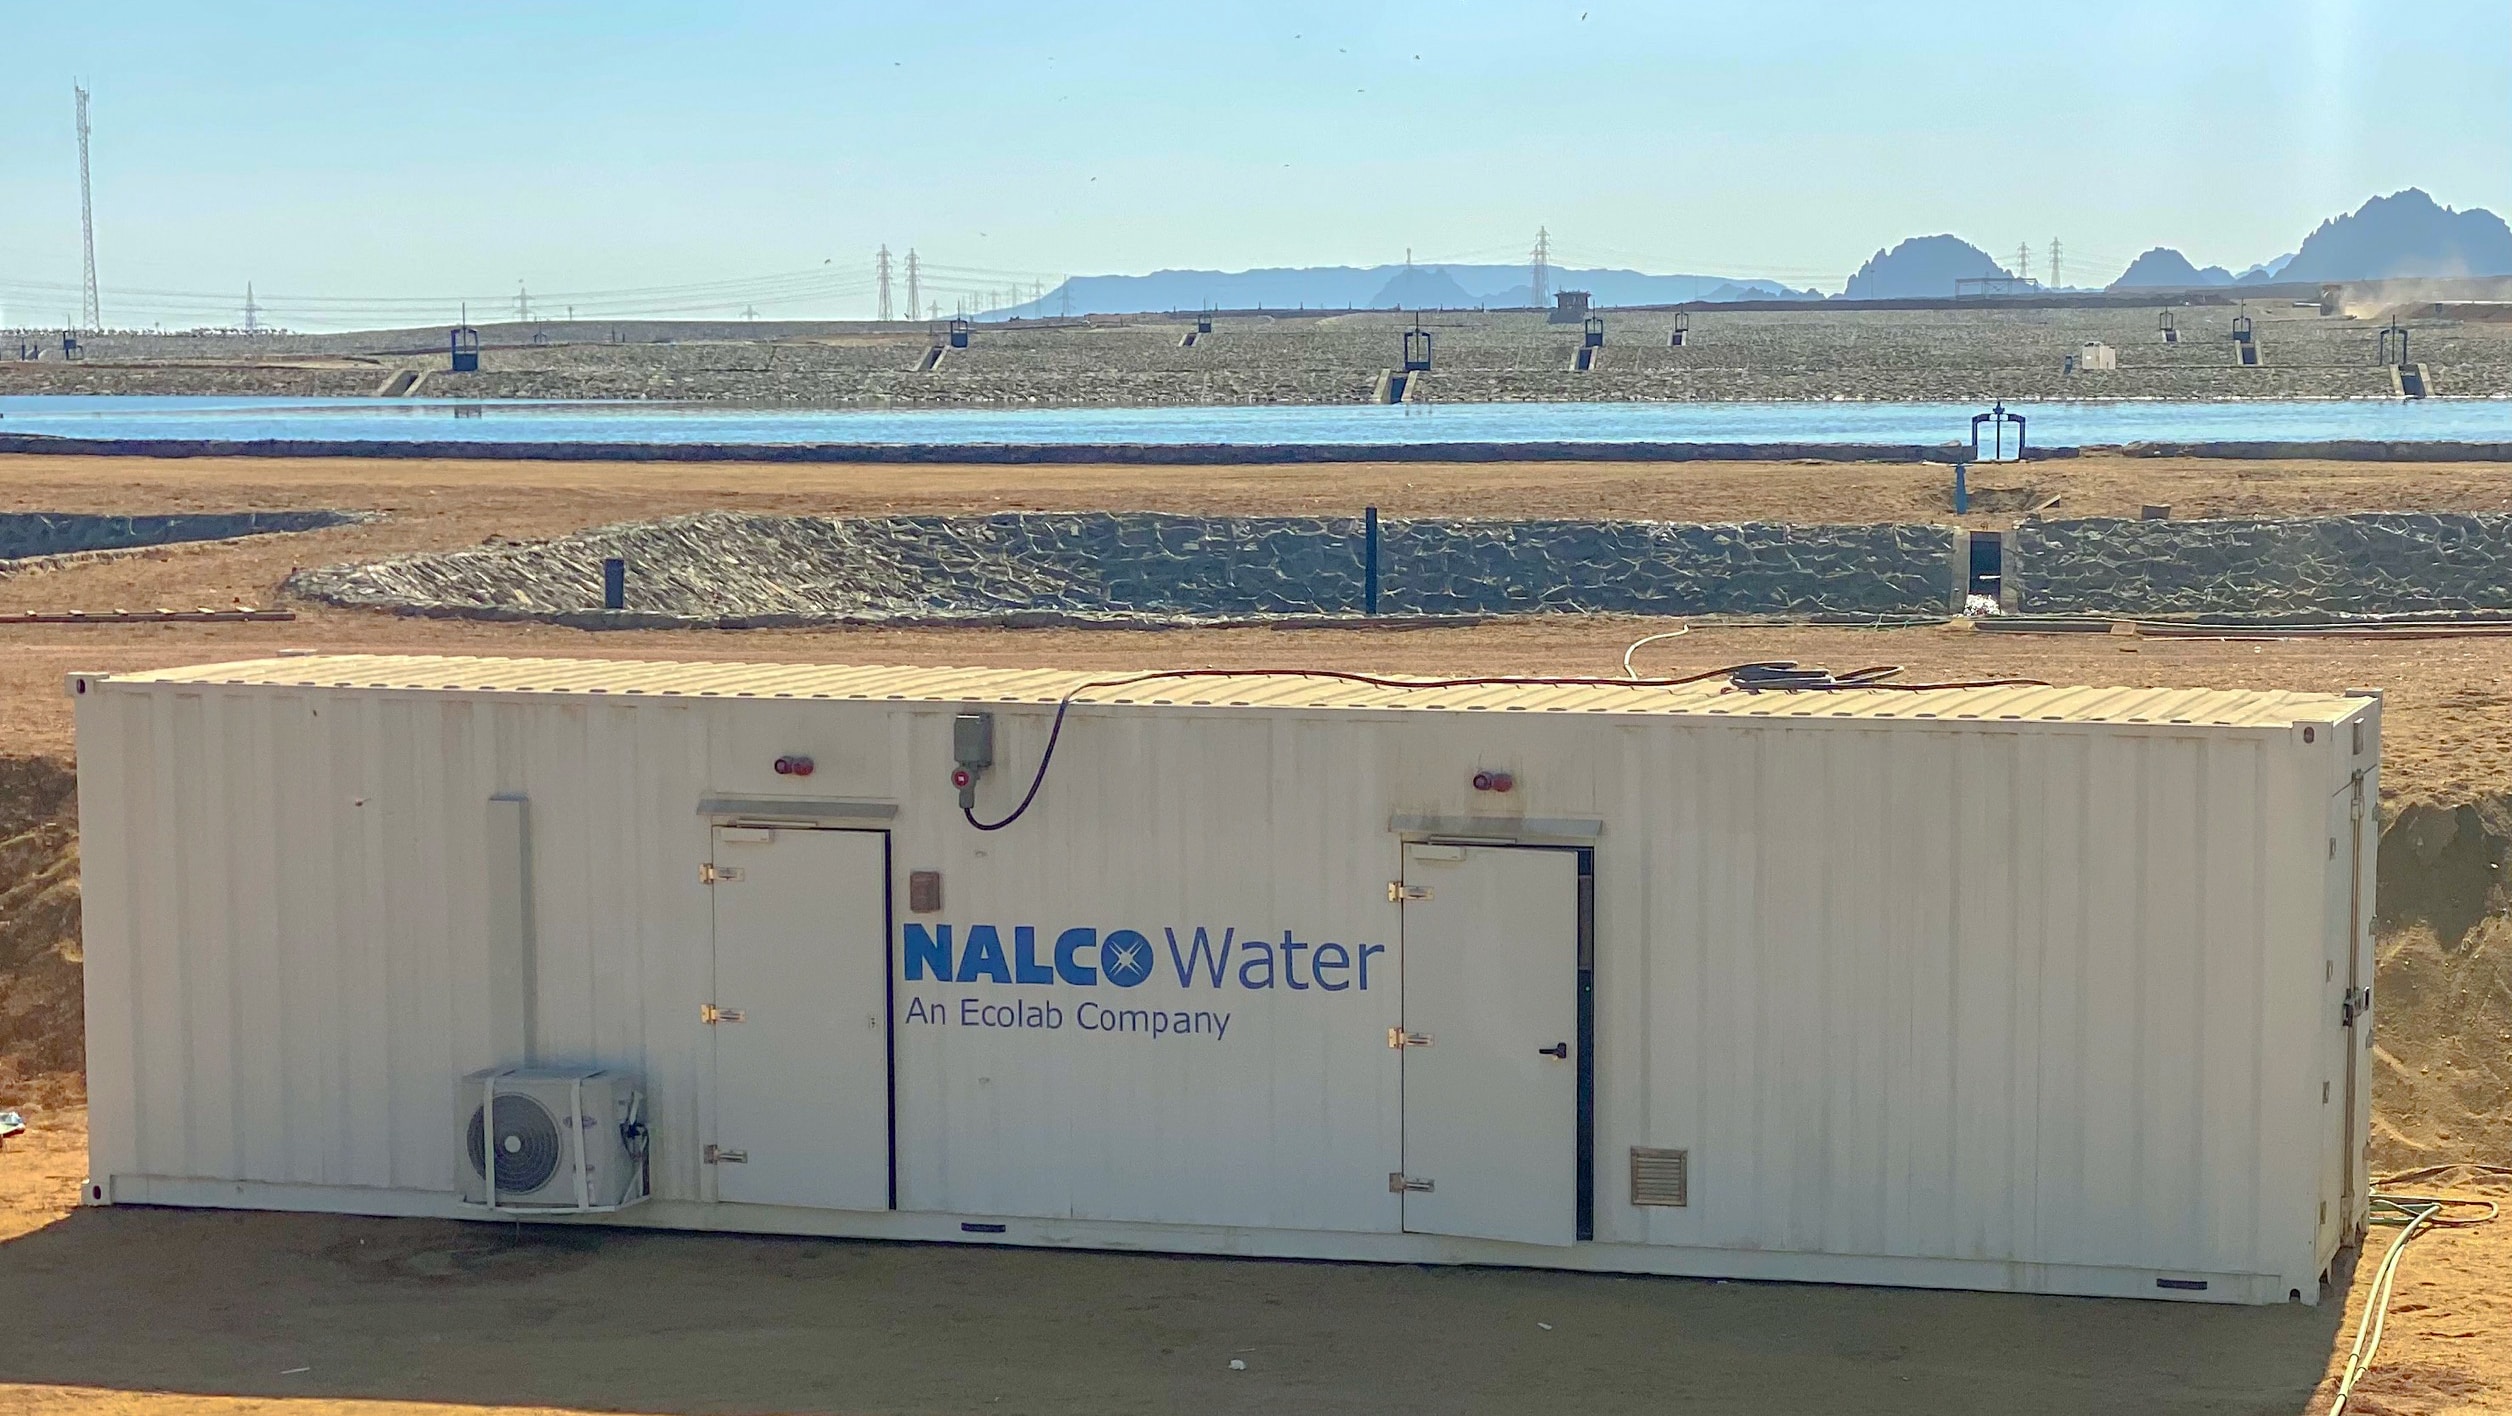 NalcoWater container in front of a body of water